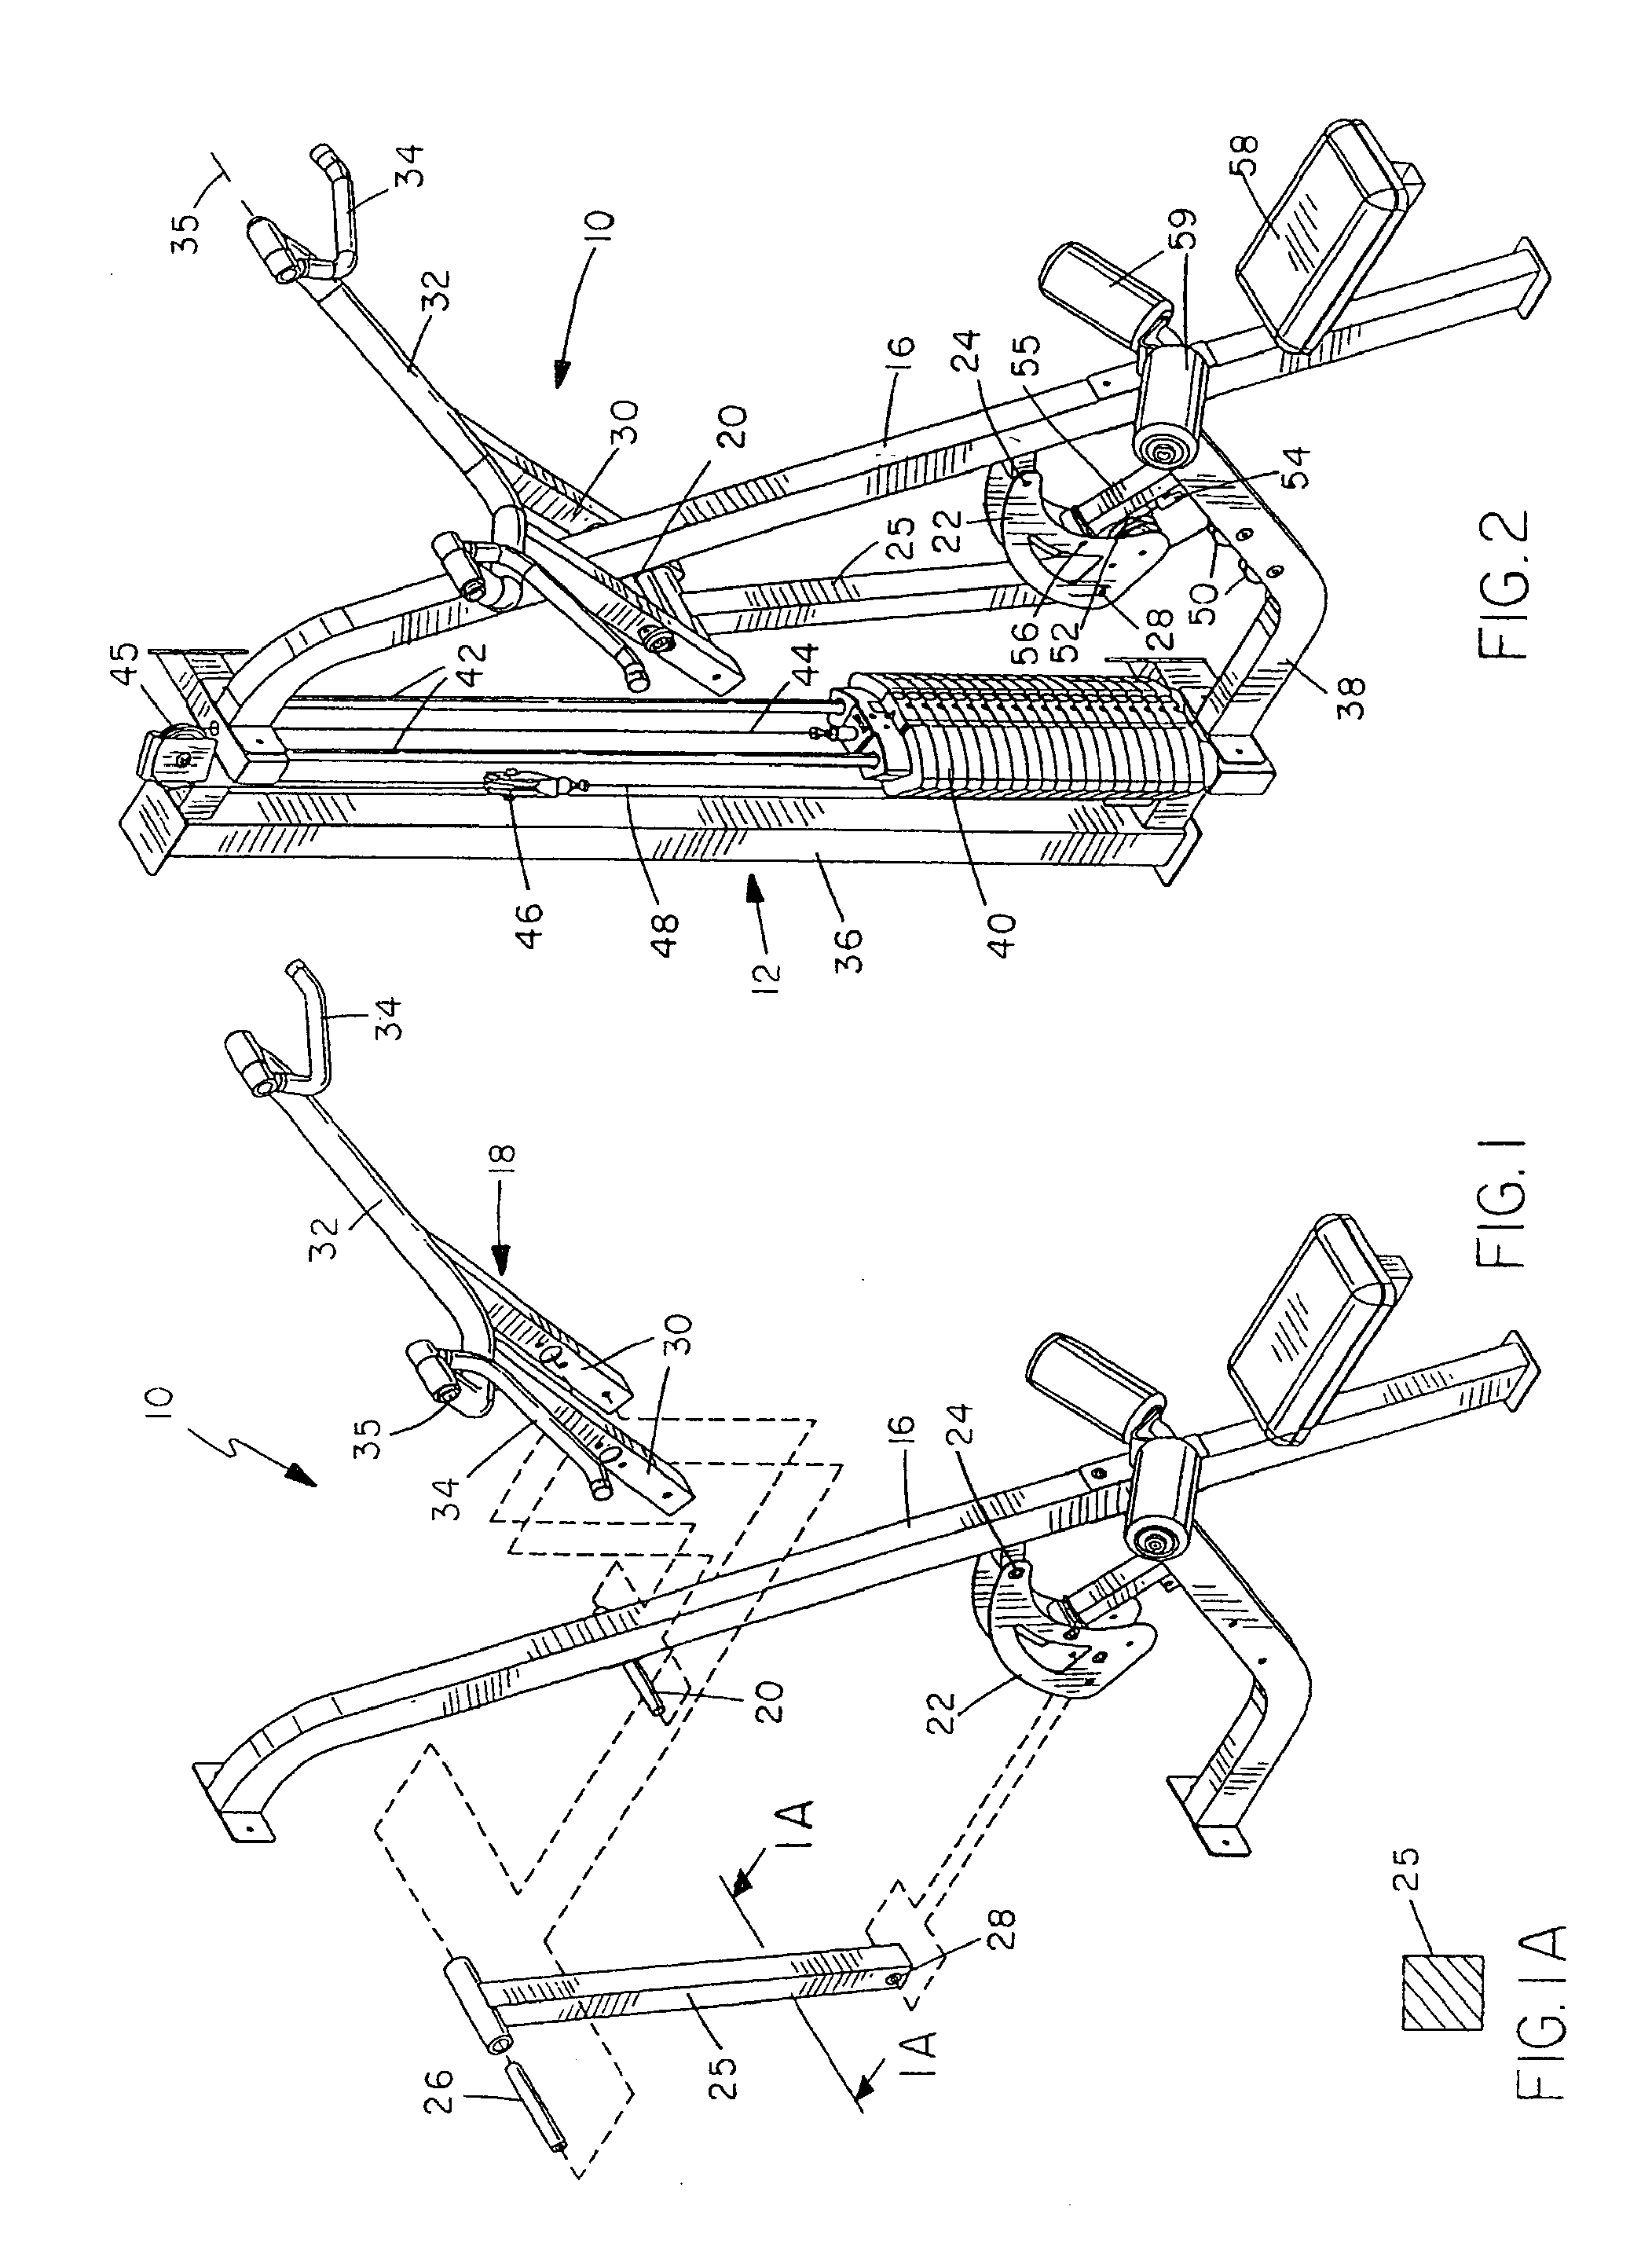 Exercise arm apparatus with pivotal linkage system